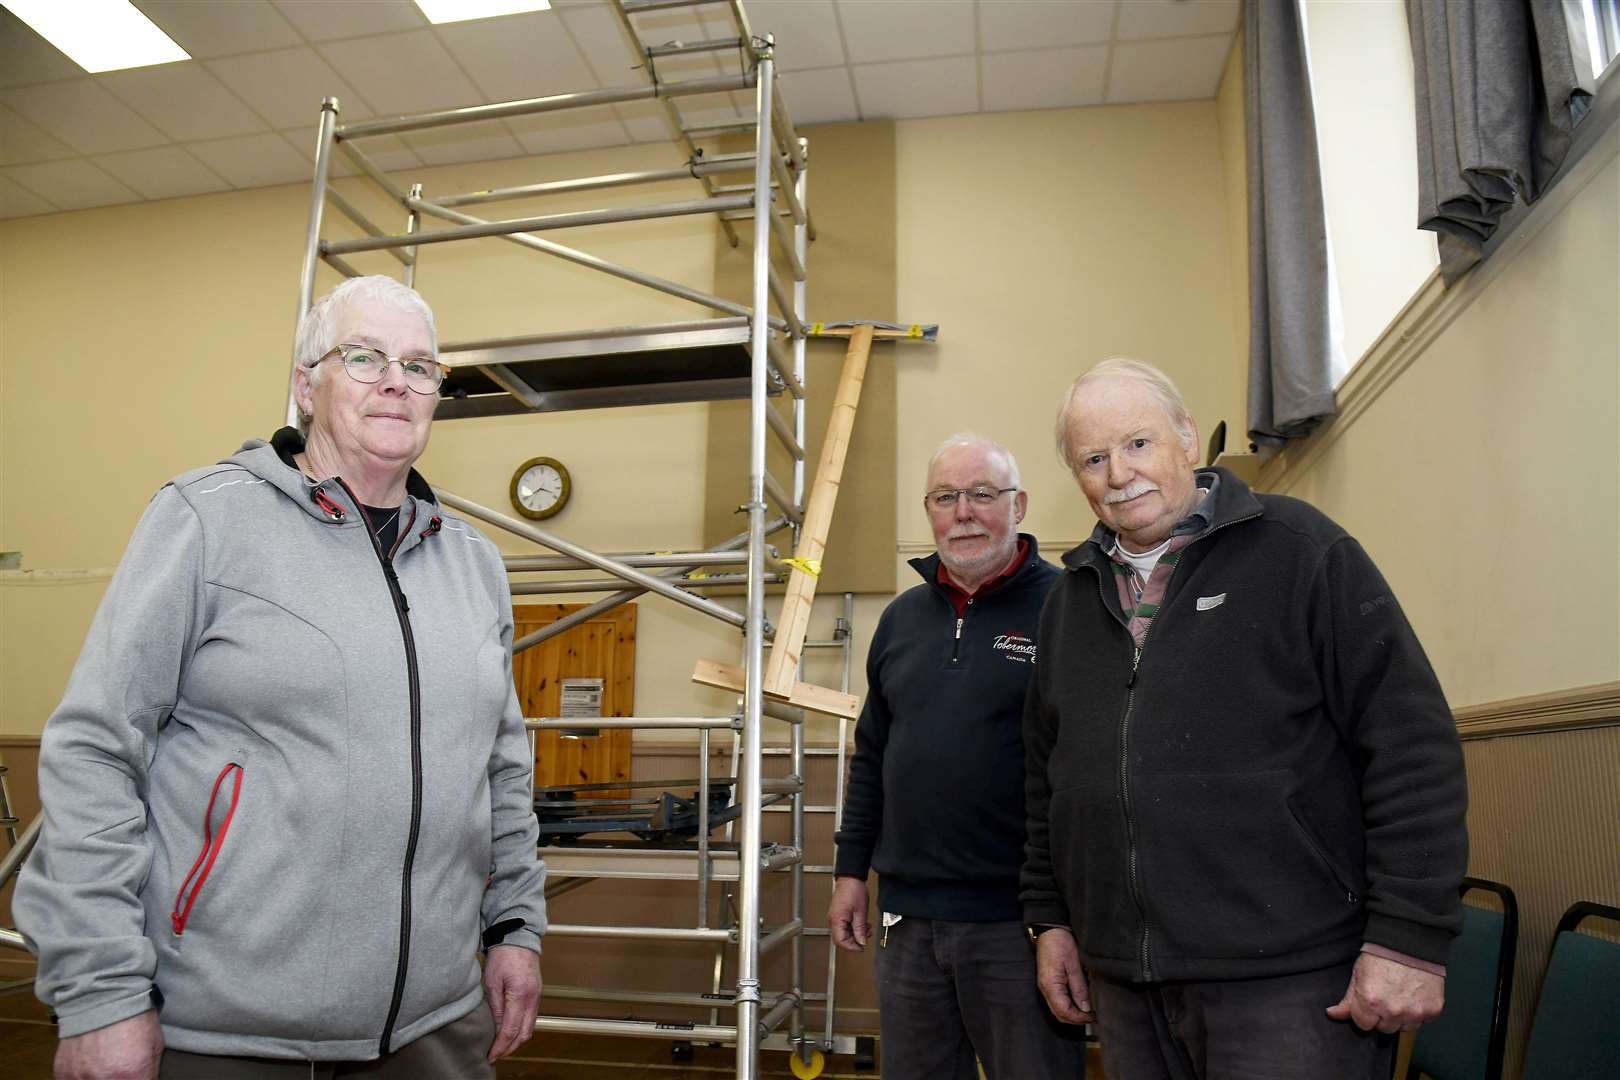 Jane Kelso, Hamish Grigor and Bob James installing acoustic panels as part of the James Milne Institute’s renovations.